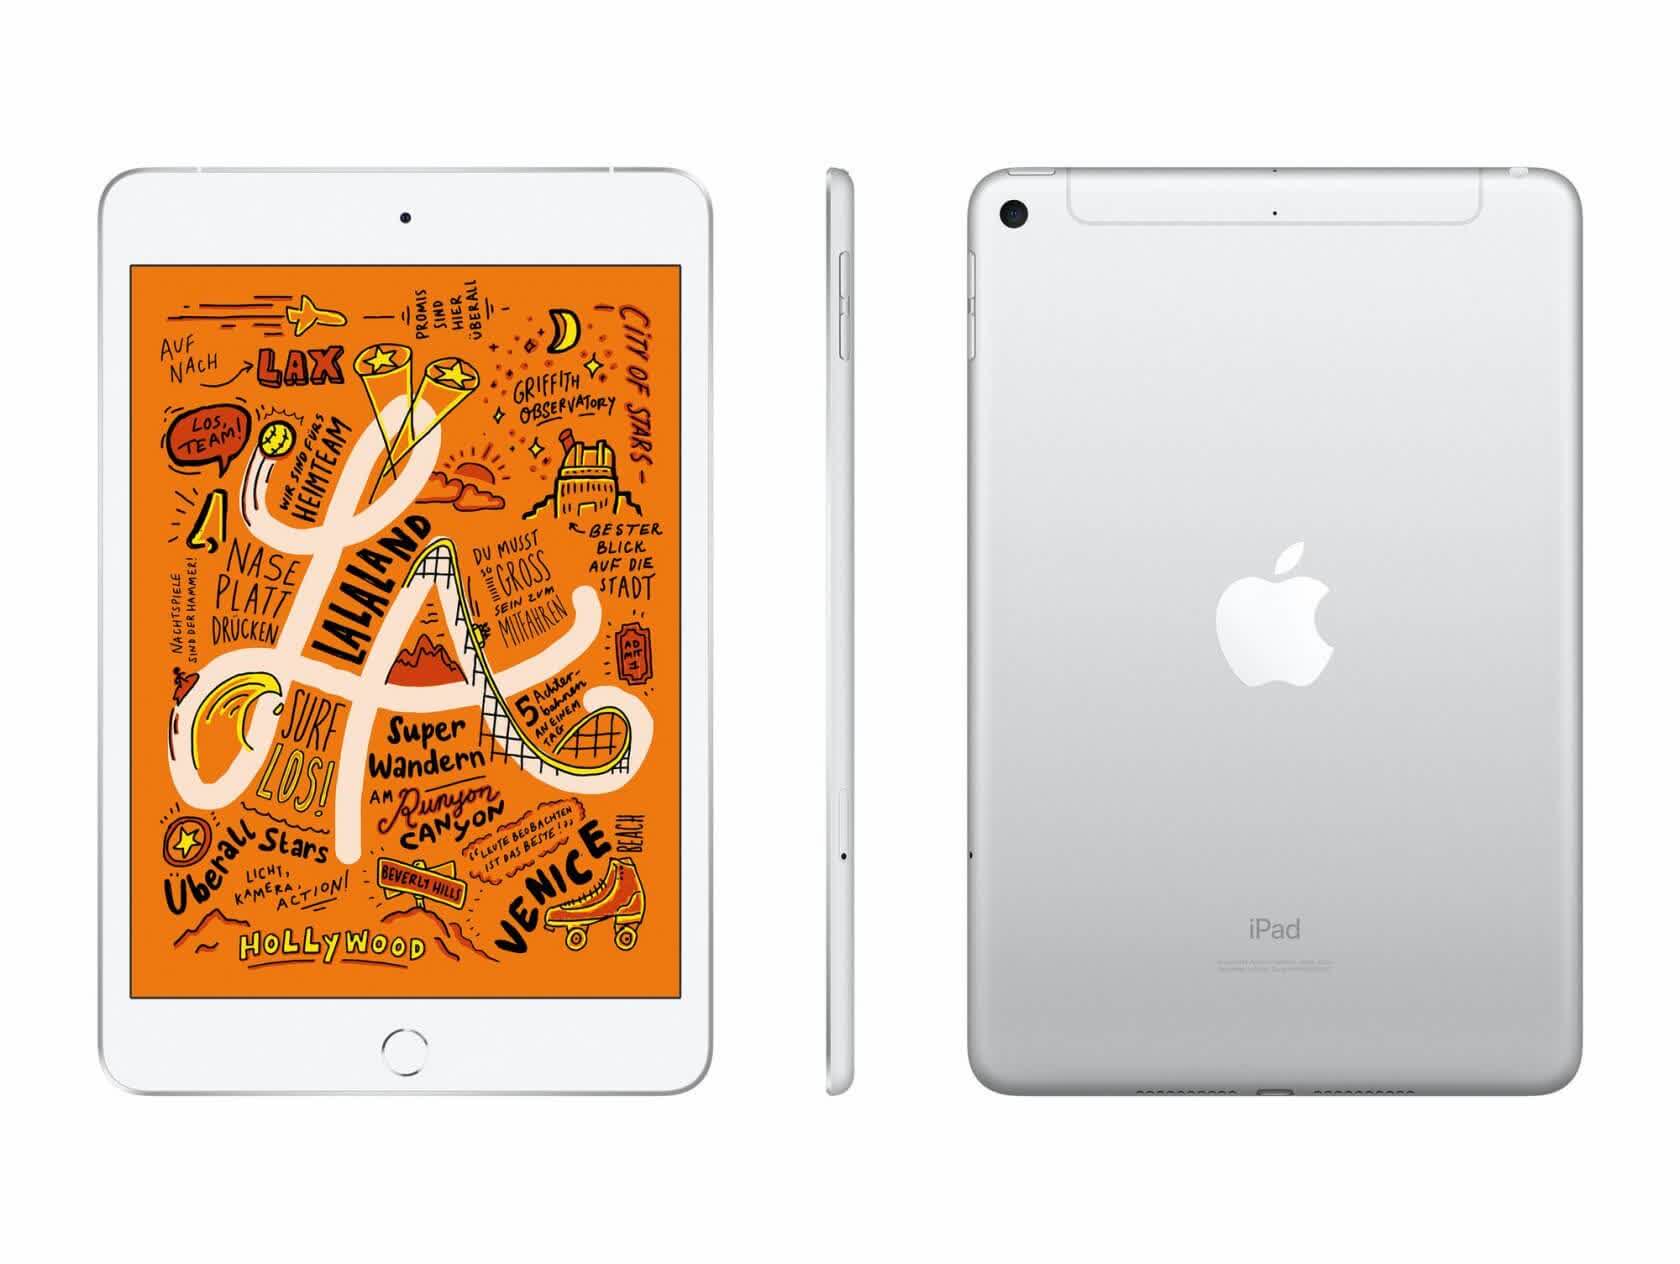 The iPad Mini will reportedly receive its biggest-ever redesign this fall